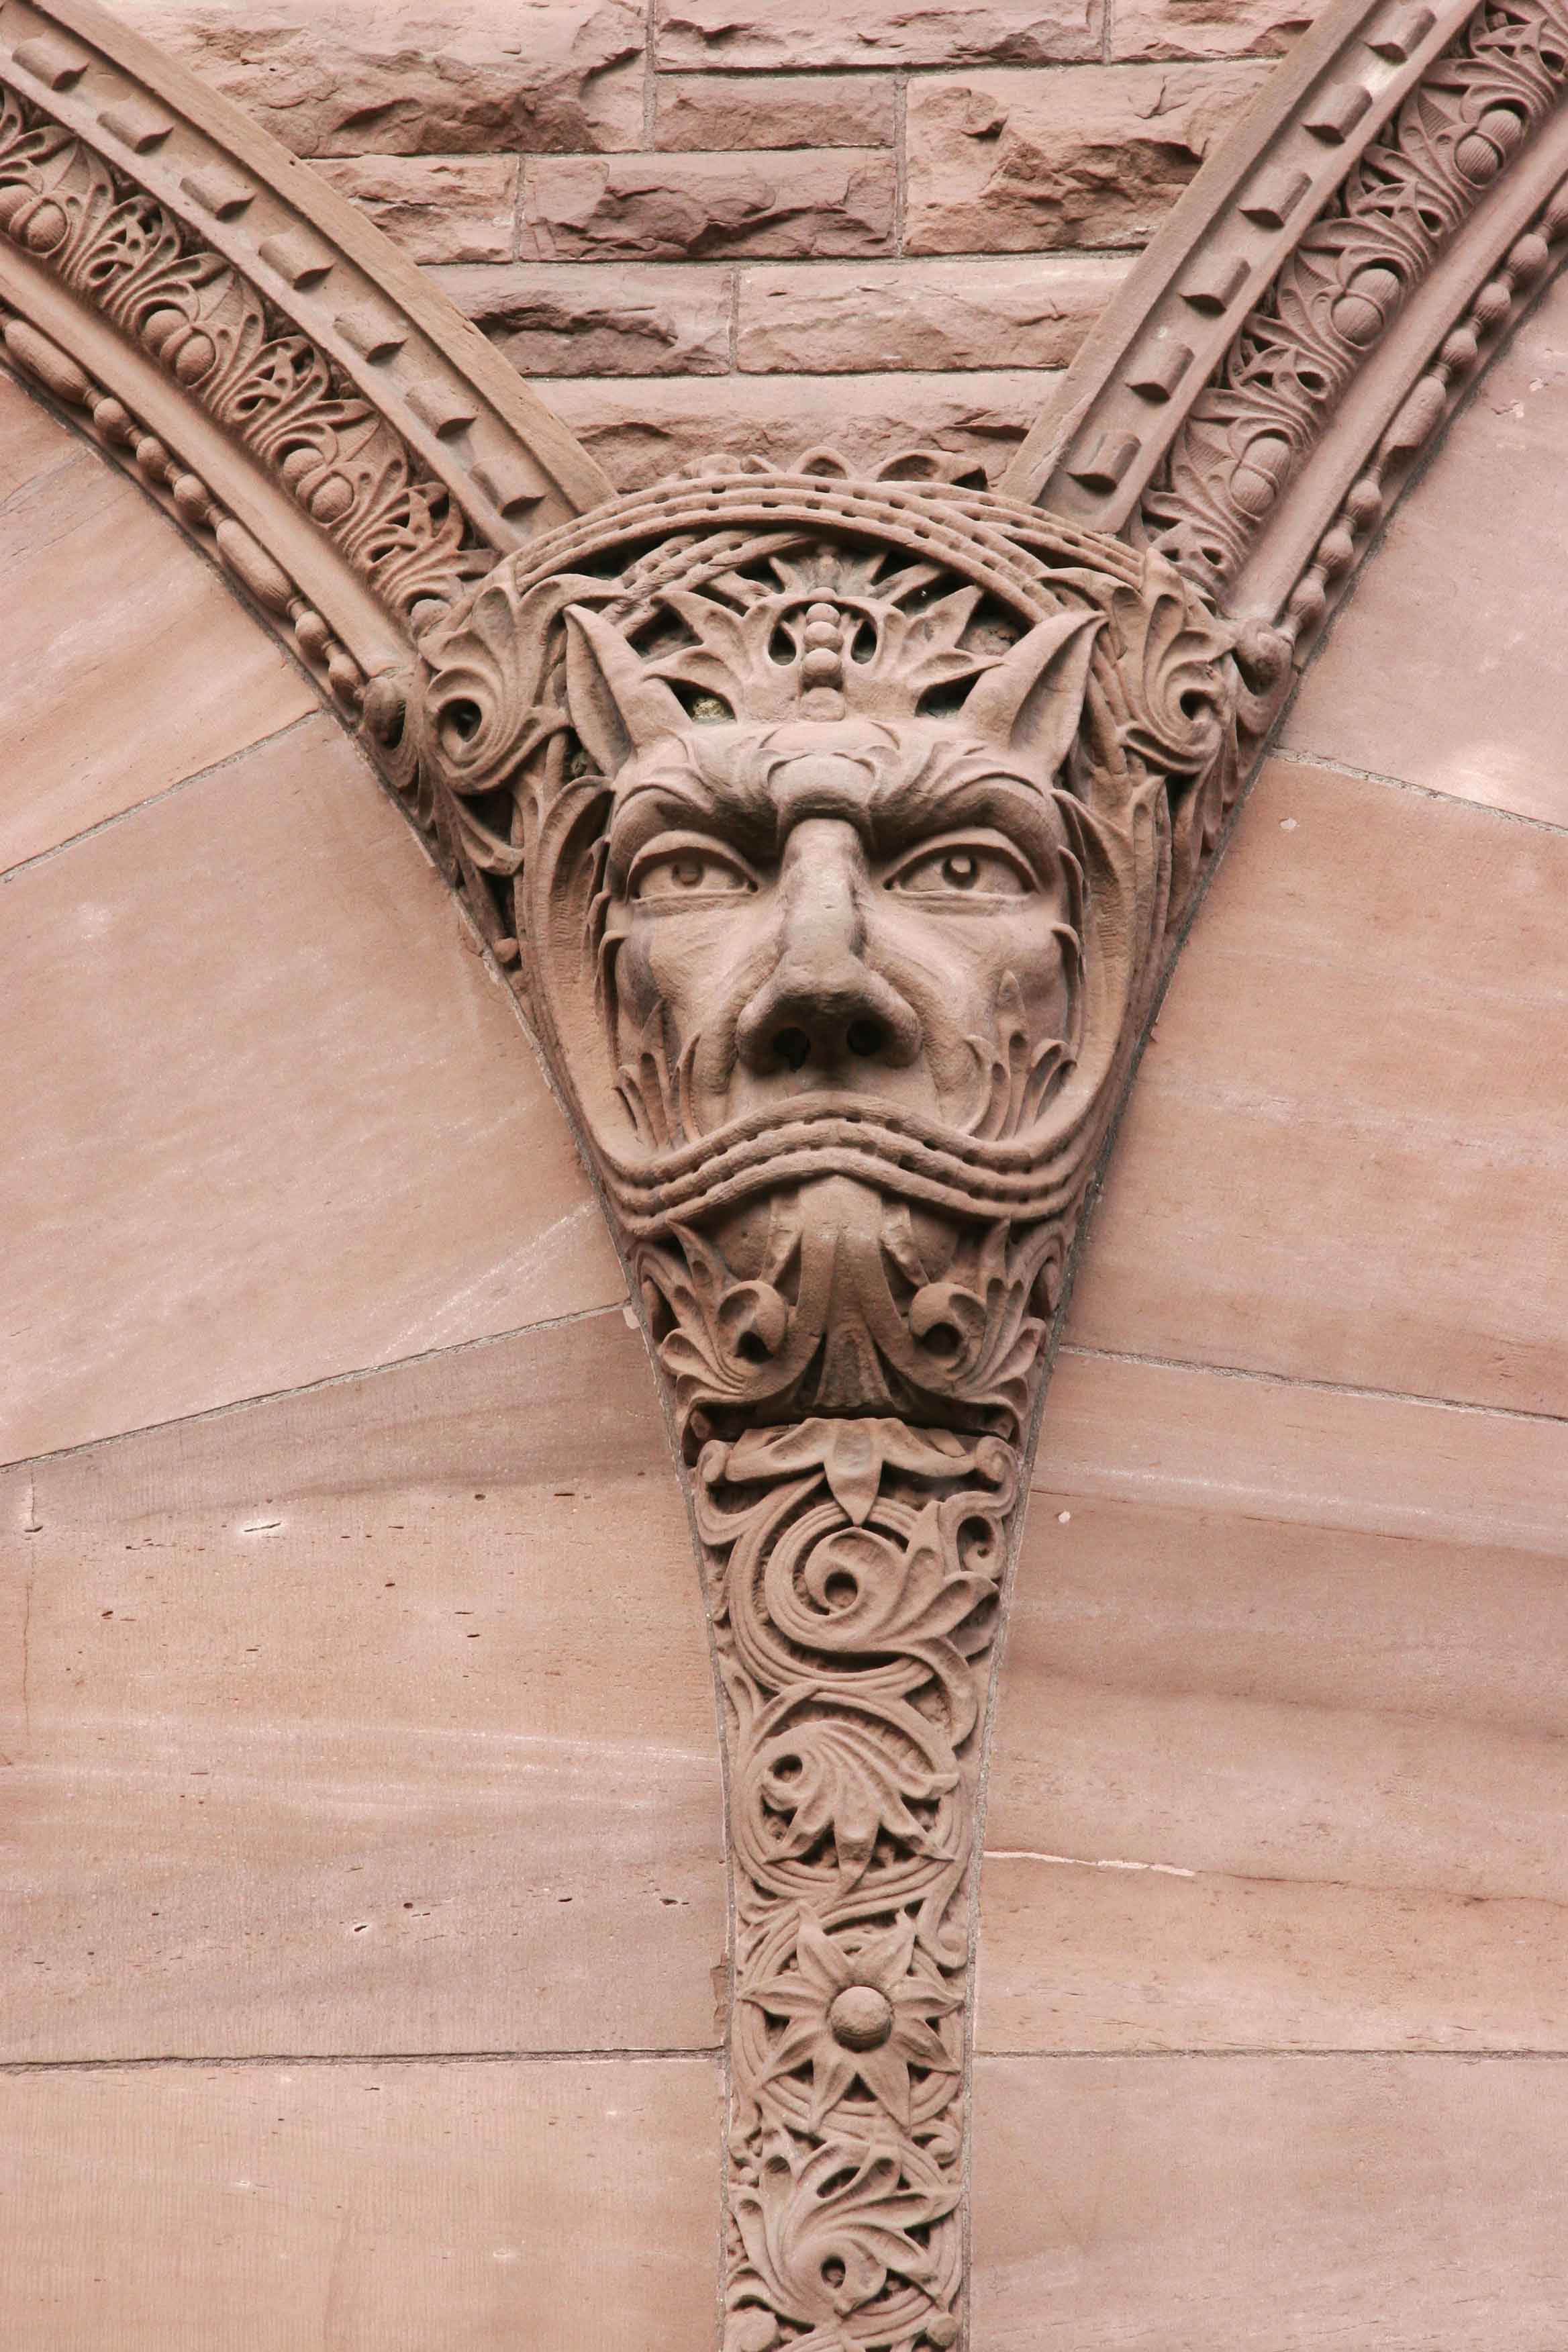 Sandstone carving of a gargoyle-like face on the outside of the Legislative building